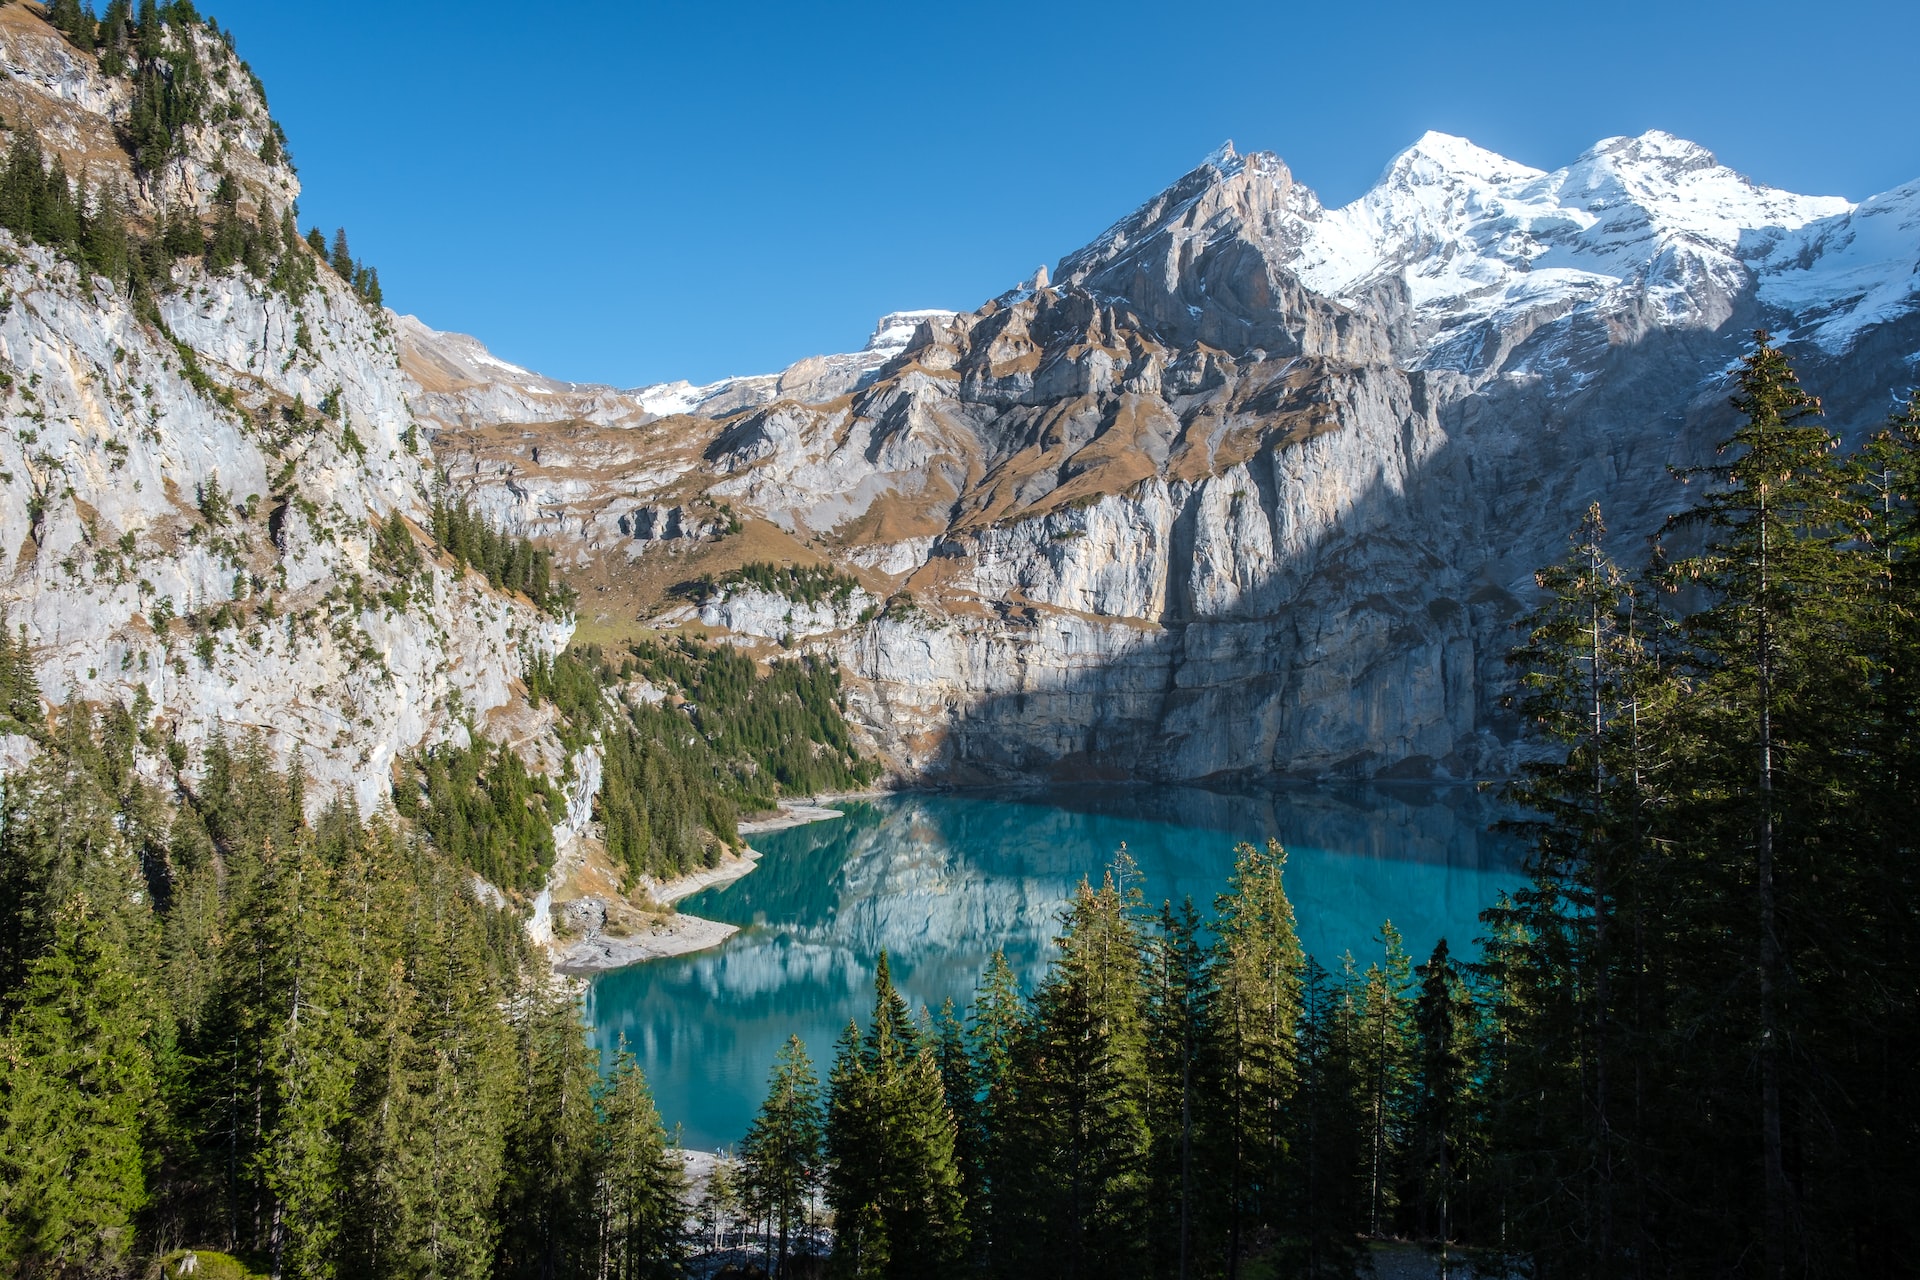 Go for a short hike to the Oeschinensee, a beautiful mountain lake